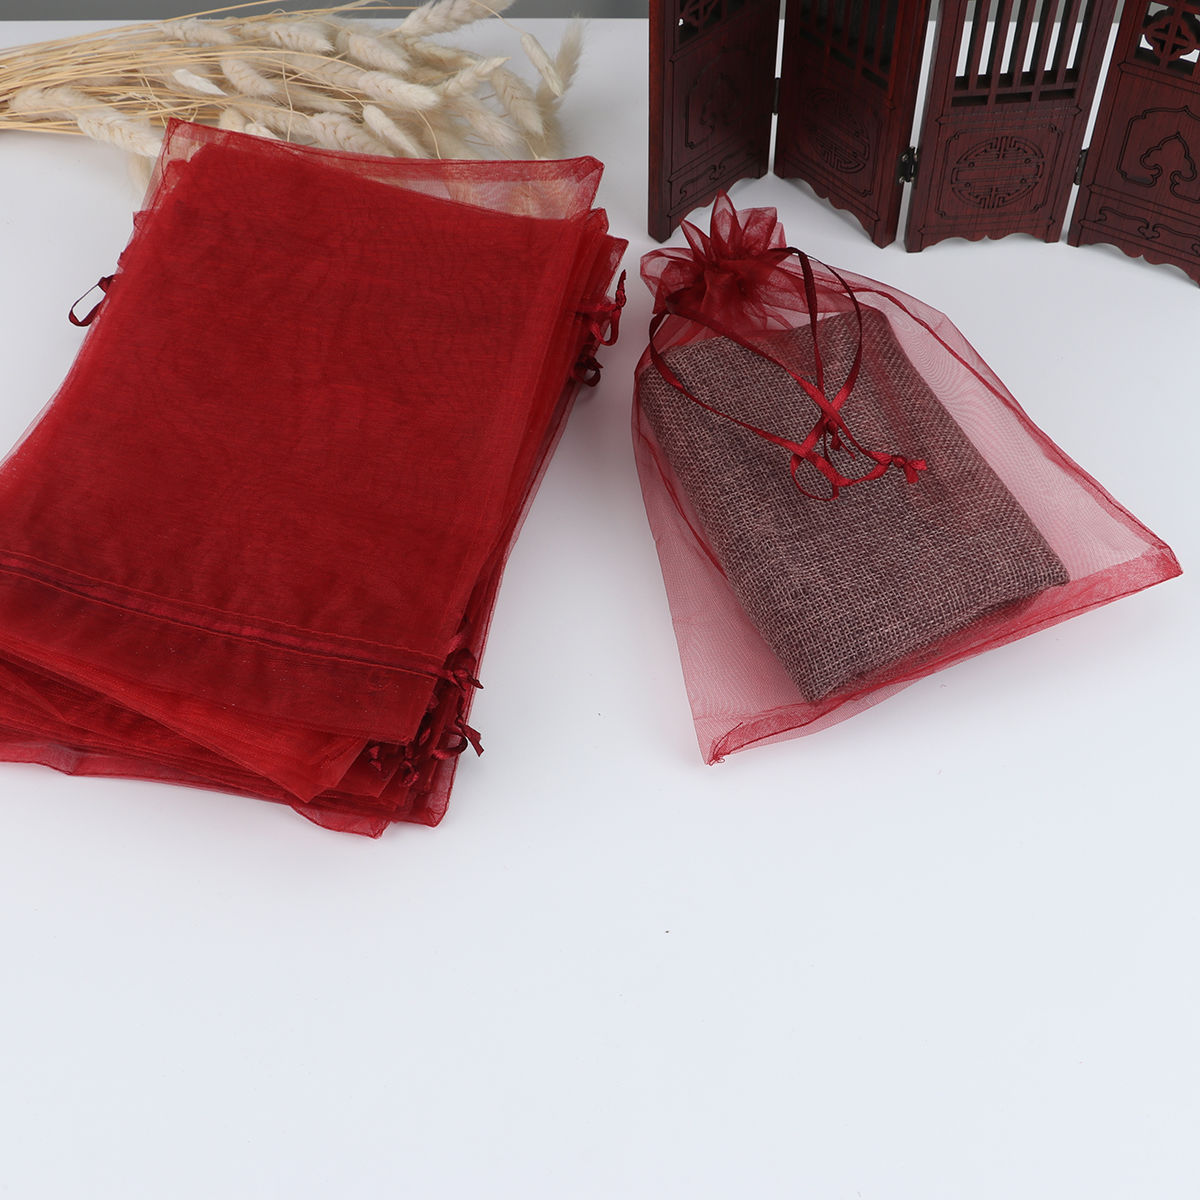 Picture of Wedding Gift Organza Jewelry Bags Drawstring Rectangle Wine Red (Usable Space: 19x16.5cm) 23cm x 17cm, 20 PCs